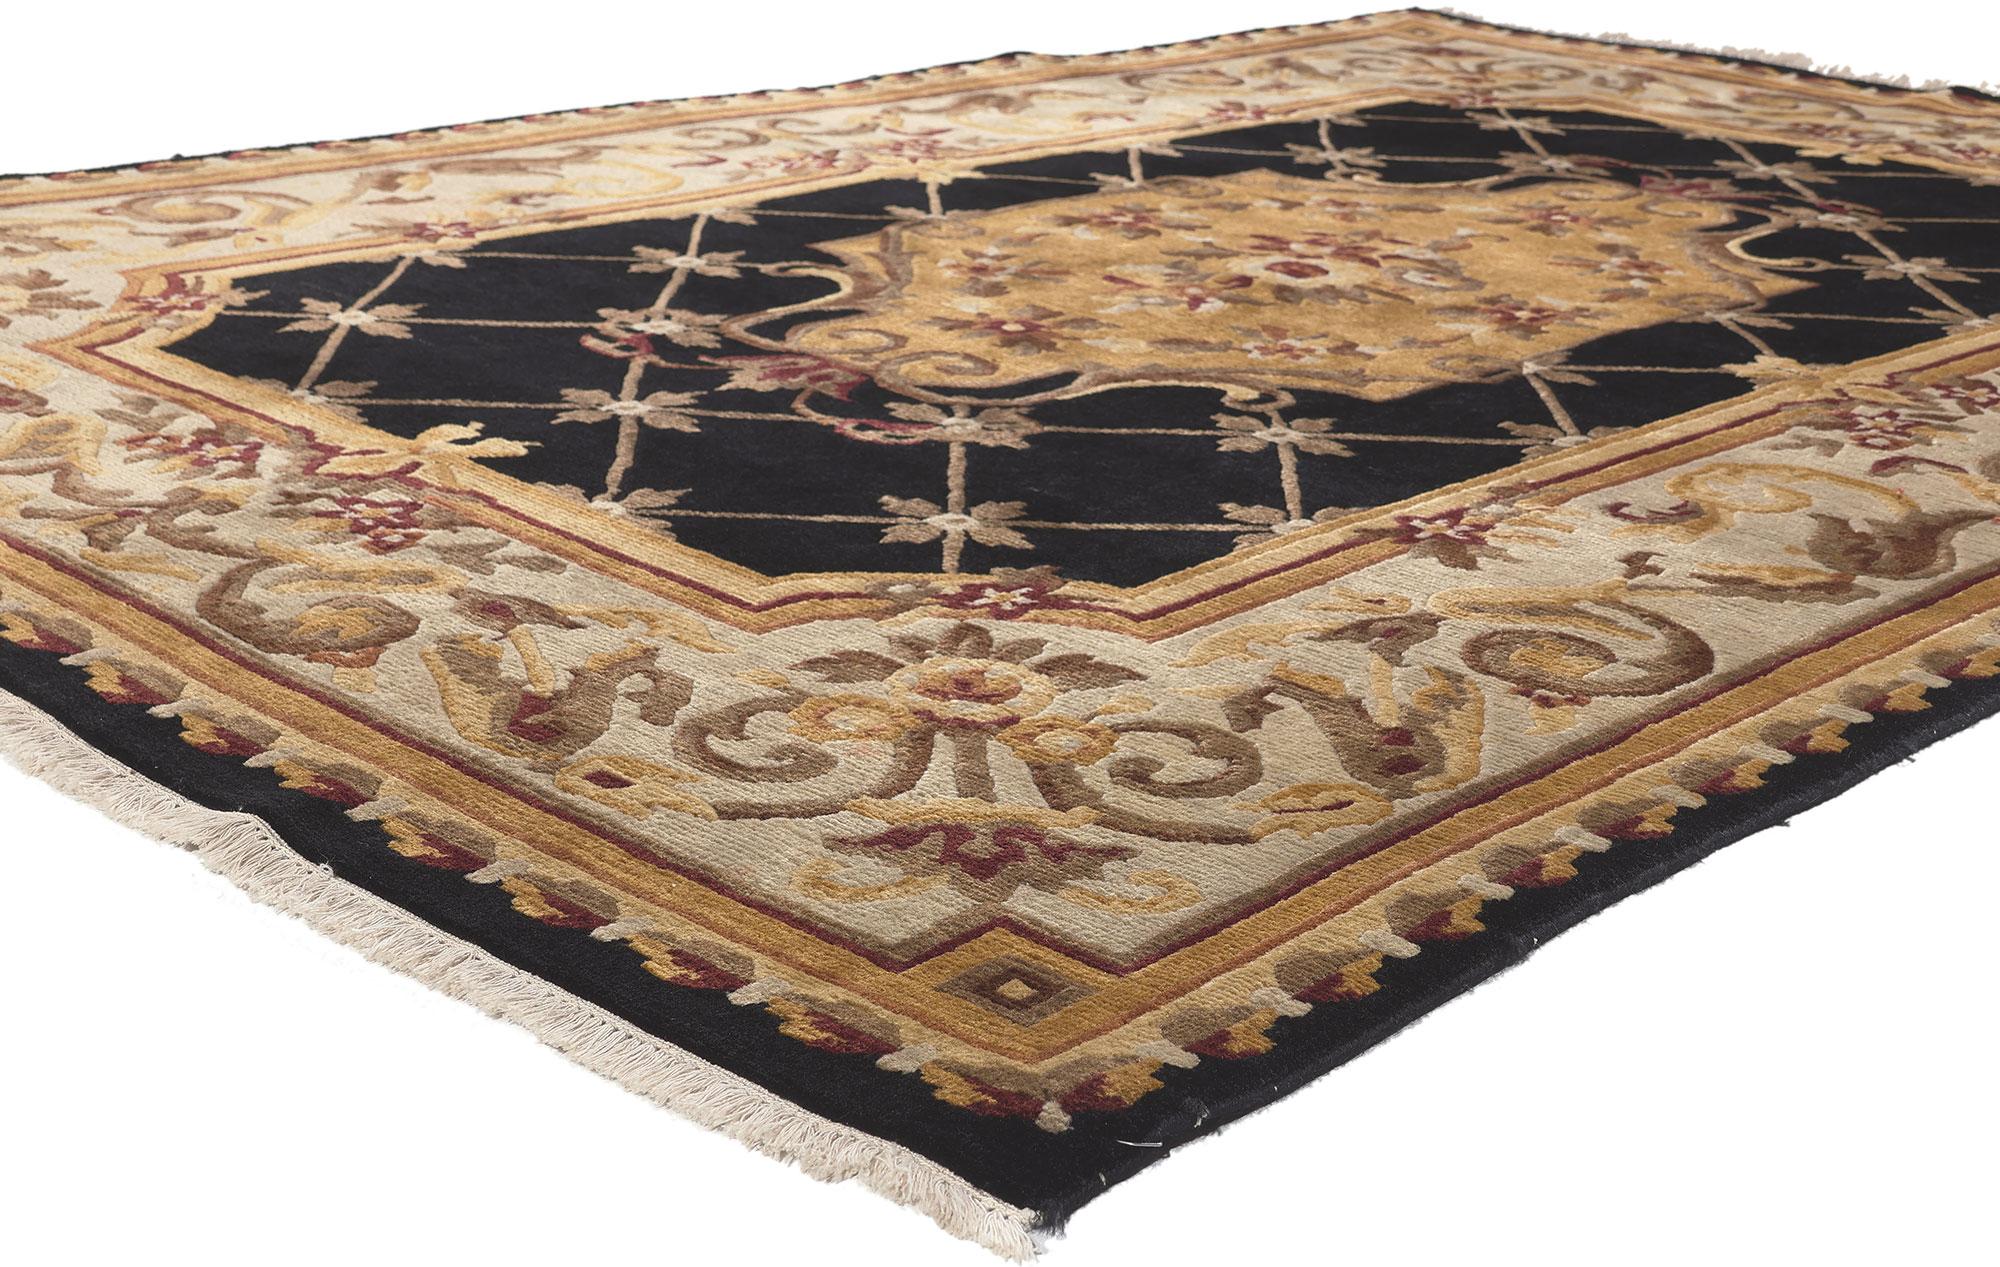 78648 Vintage Nepalese Savonnerie Tibetan Rug with Aubusson Design, 05'11 x 09'00.
Earth-tone elegance collides with traditional sensibility in this vintage Savonnerie Tibetan rug. The intricate Aubusson design and earthy colors woven into this